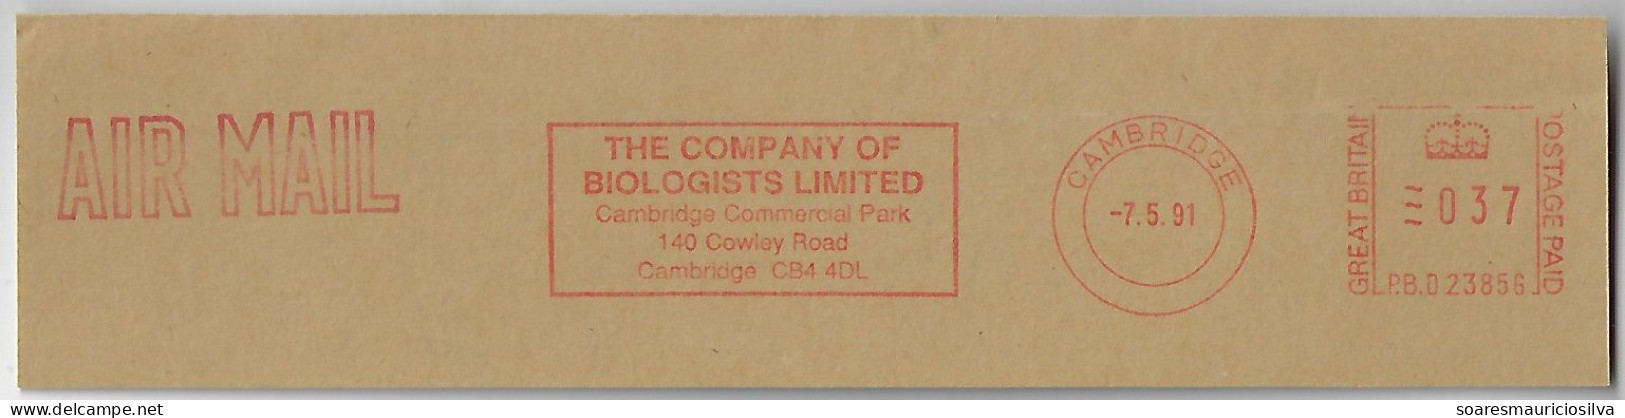 Great Britain 1991 Cover Fragment Meter Stamp Pitney Bowes 6300 Series Slogan The Company Of Biologists Ltd In Cambridge - Storia Postale